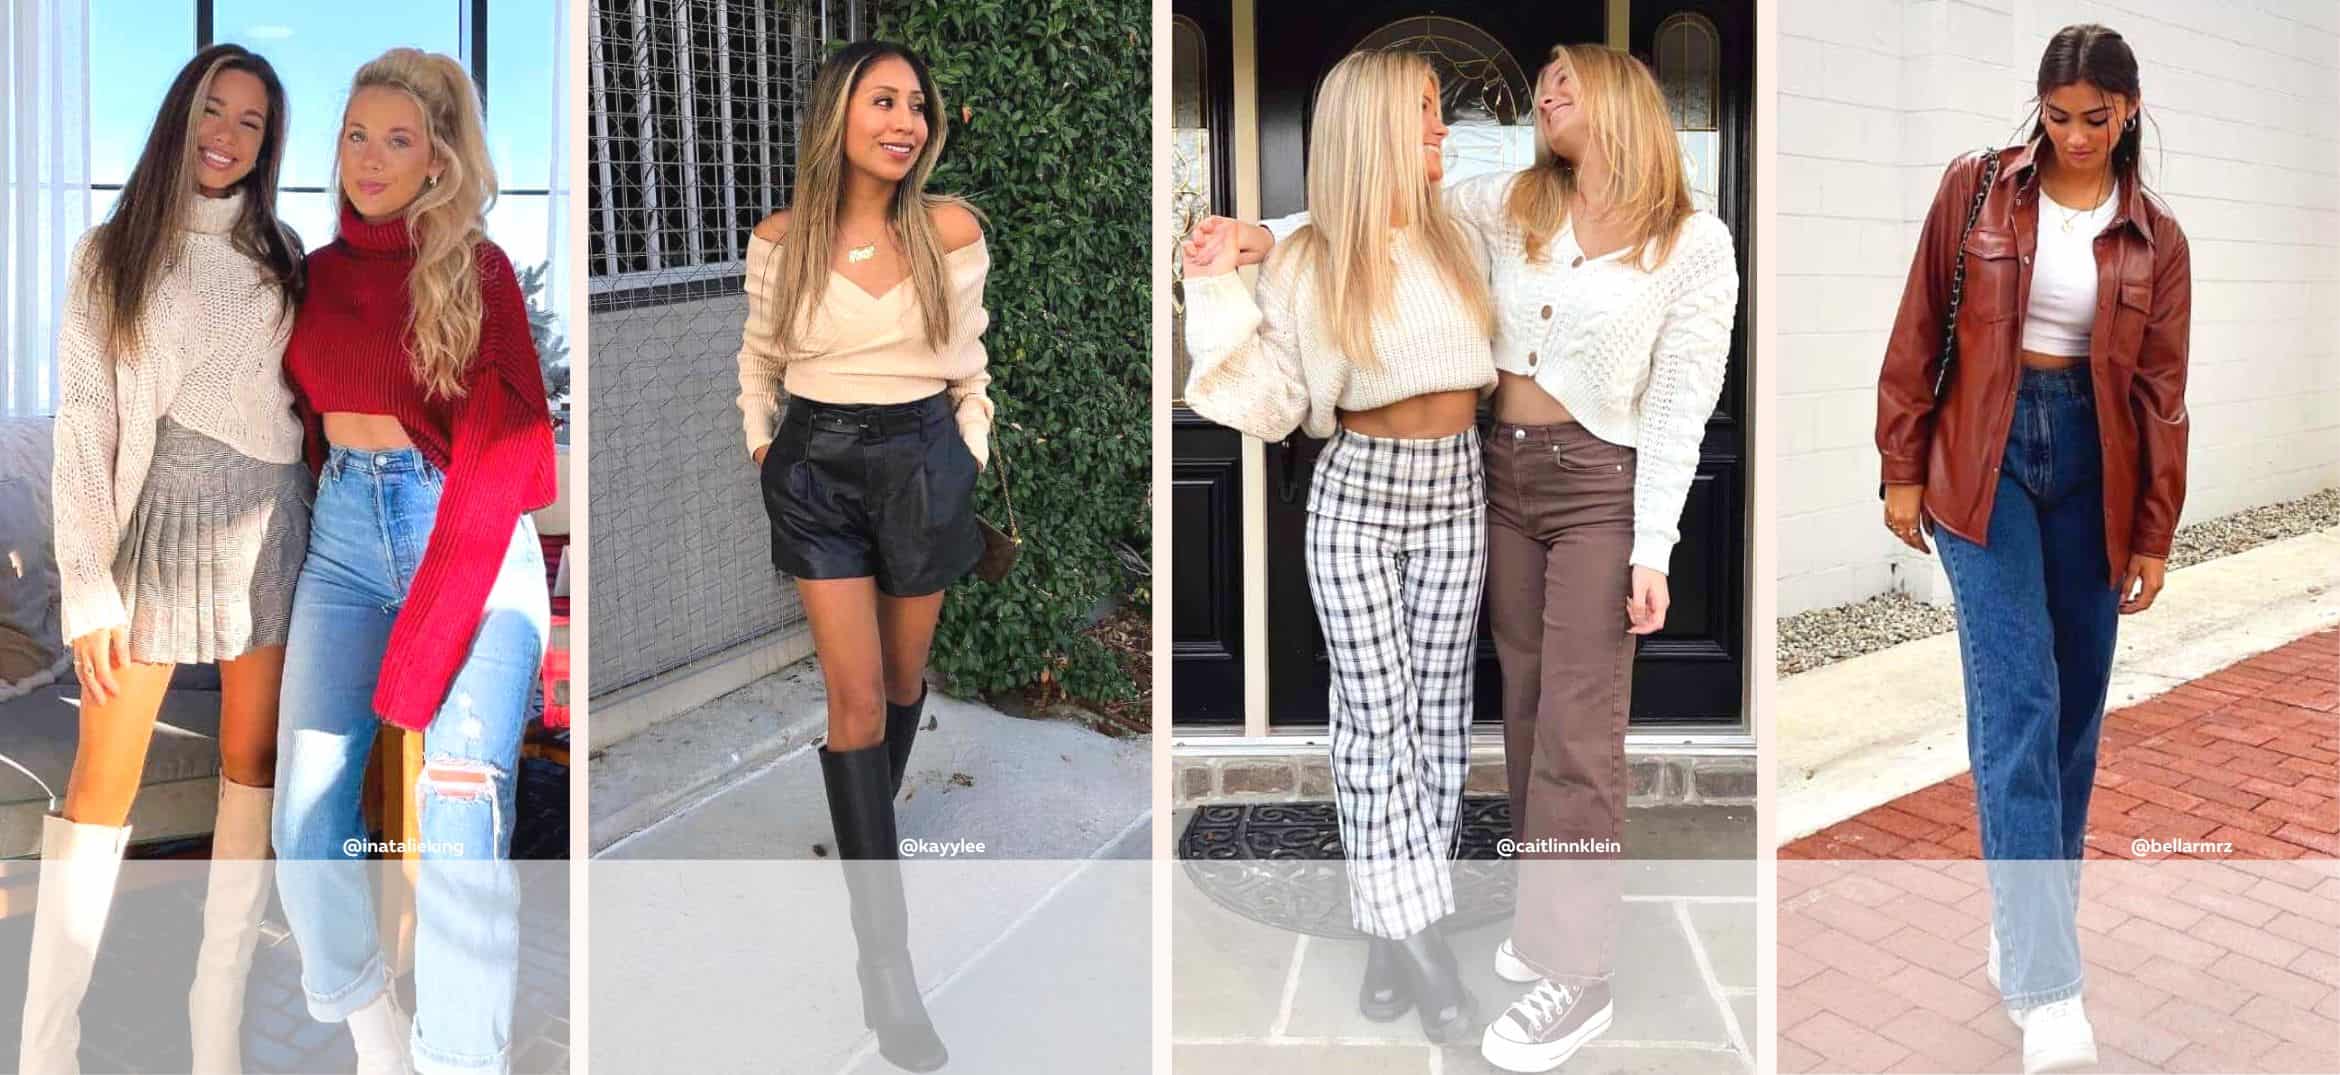 Fun Fall Fashions — The BFF Blog  Winter fashion outfits, Outfits